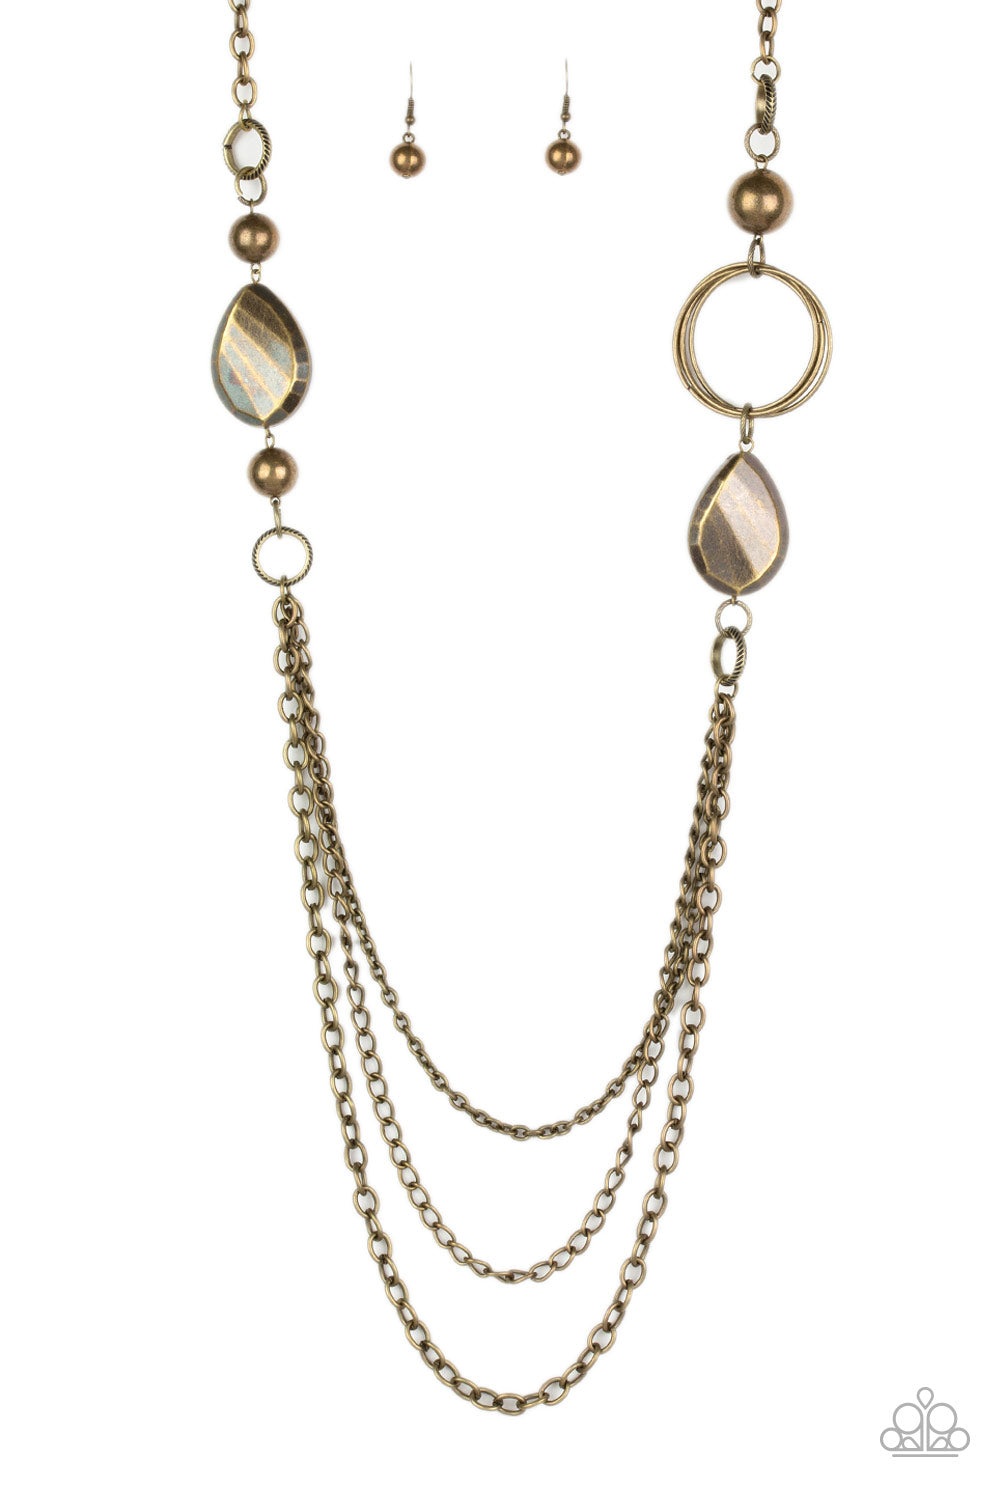 Rebels Have More Fun - Brass Necklace Set